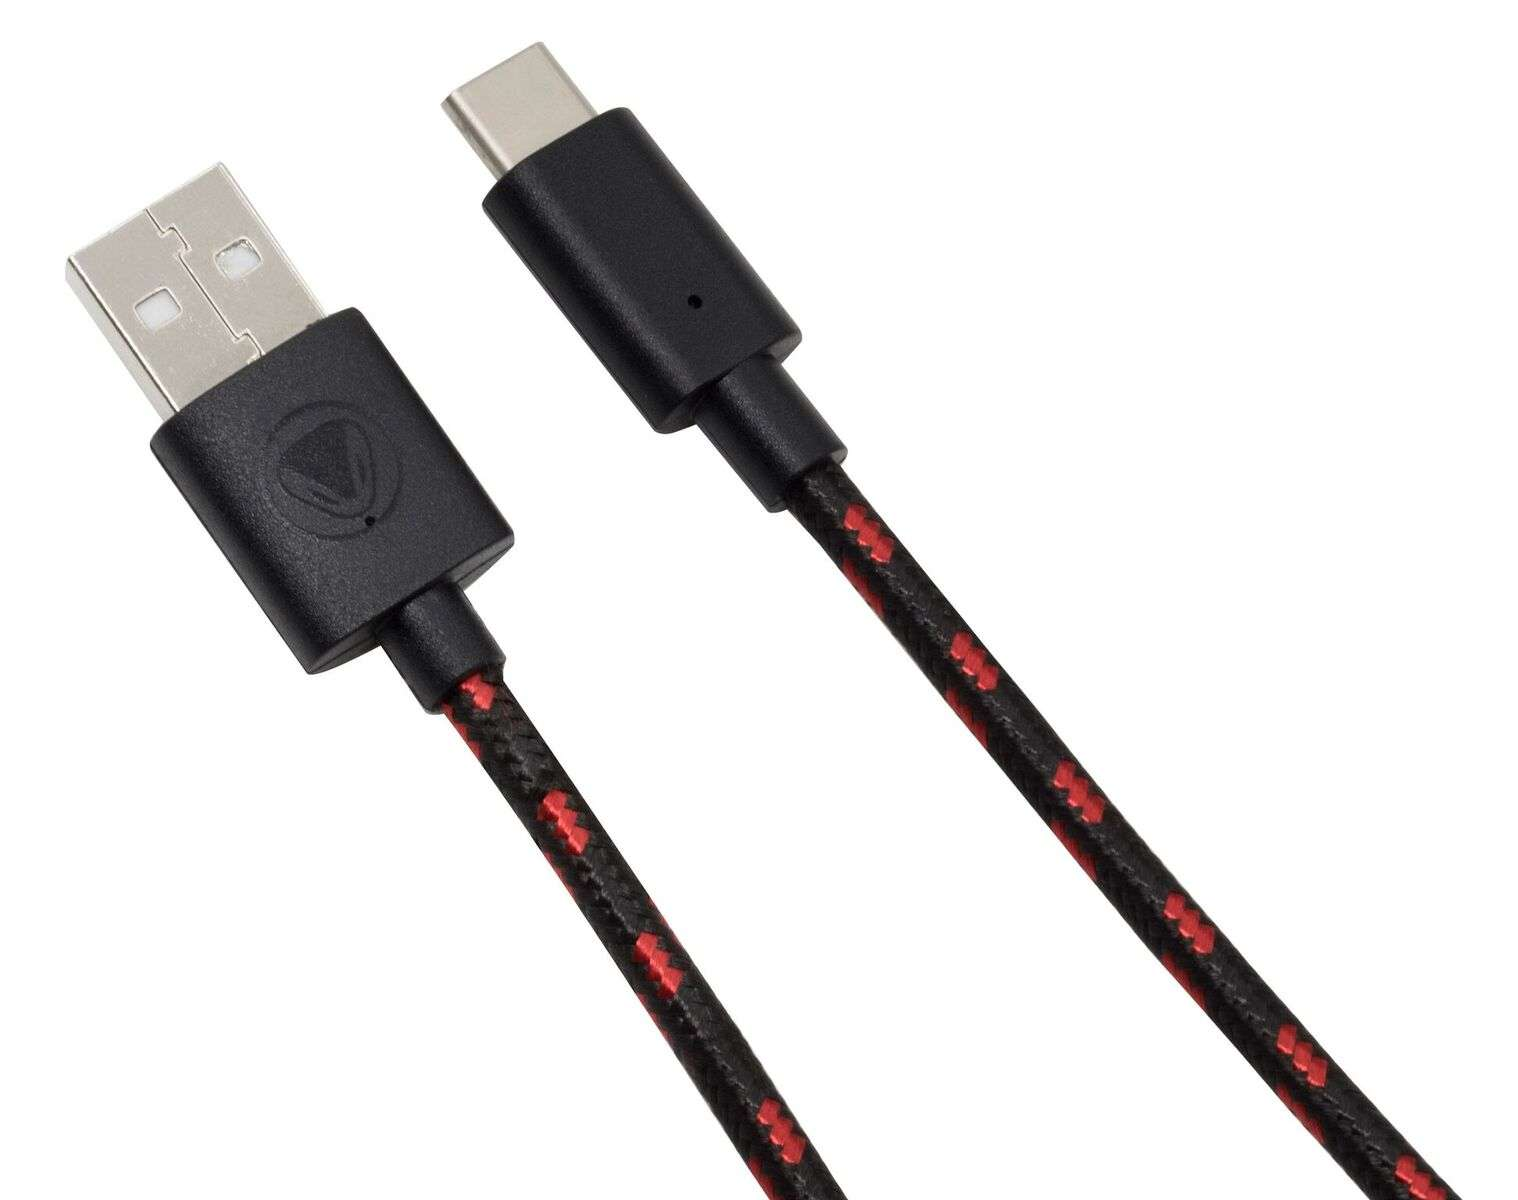 CHARGE:CABLE SNAKEBYTE Kabel USB NSW